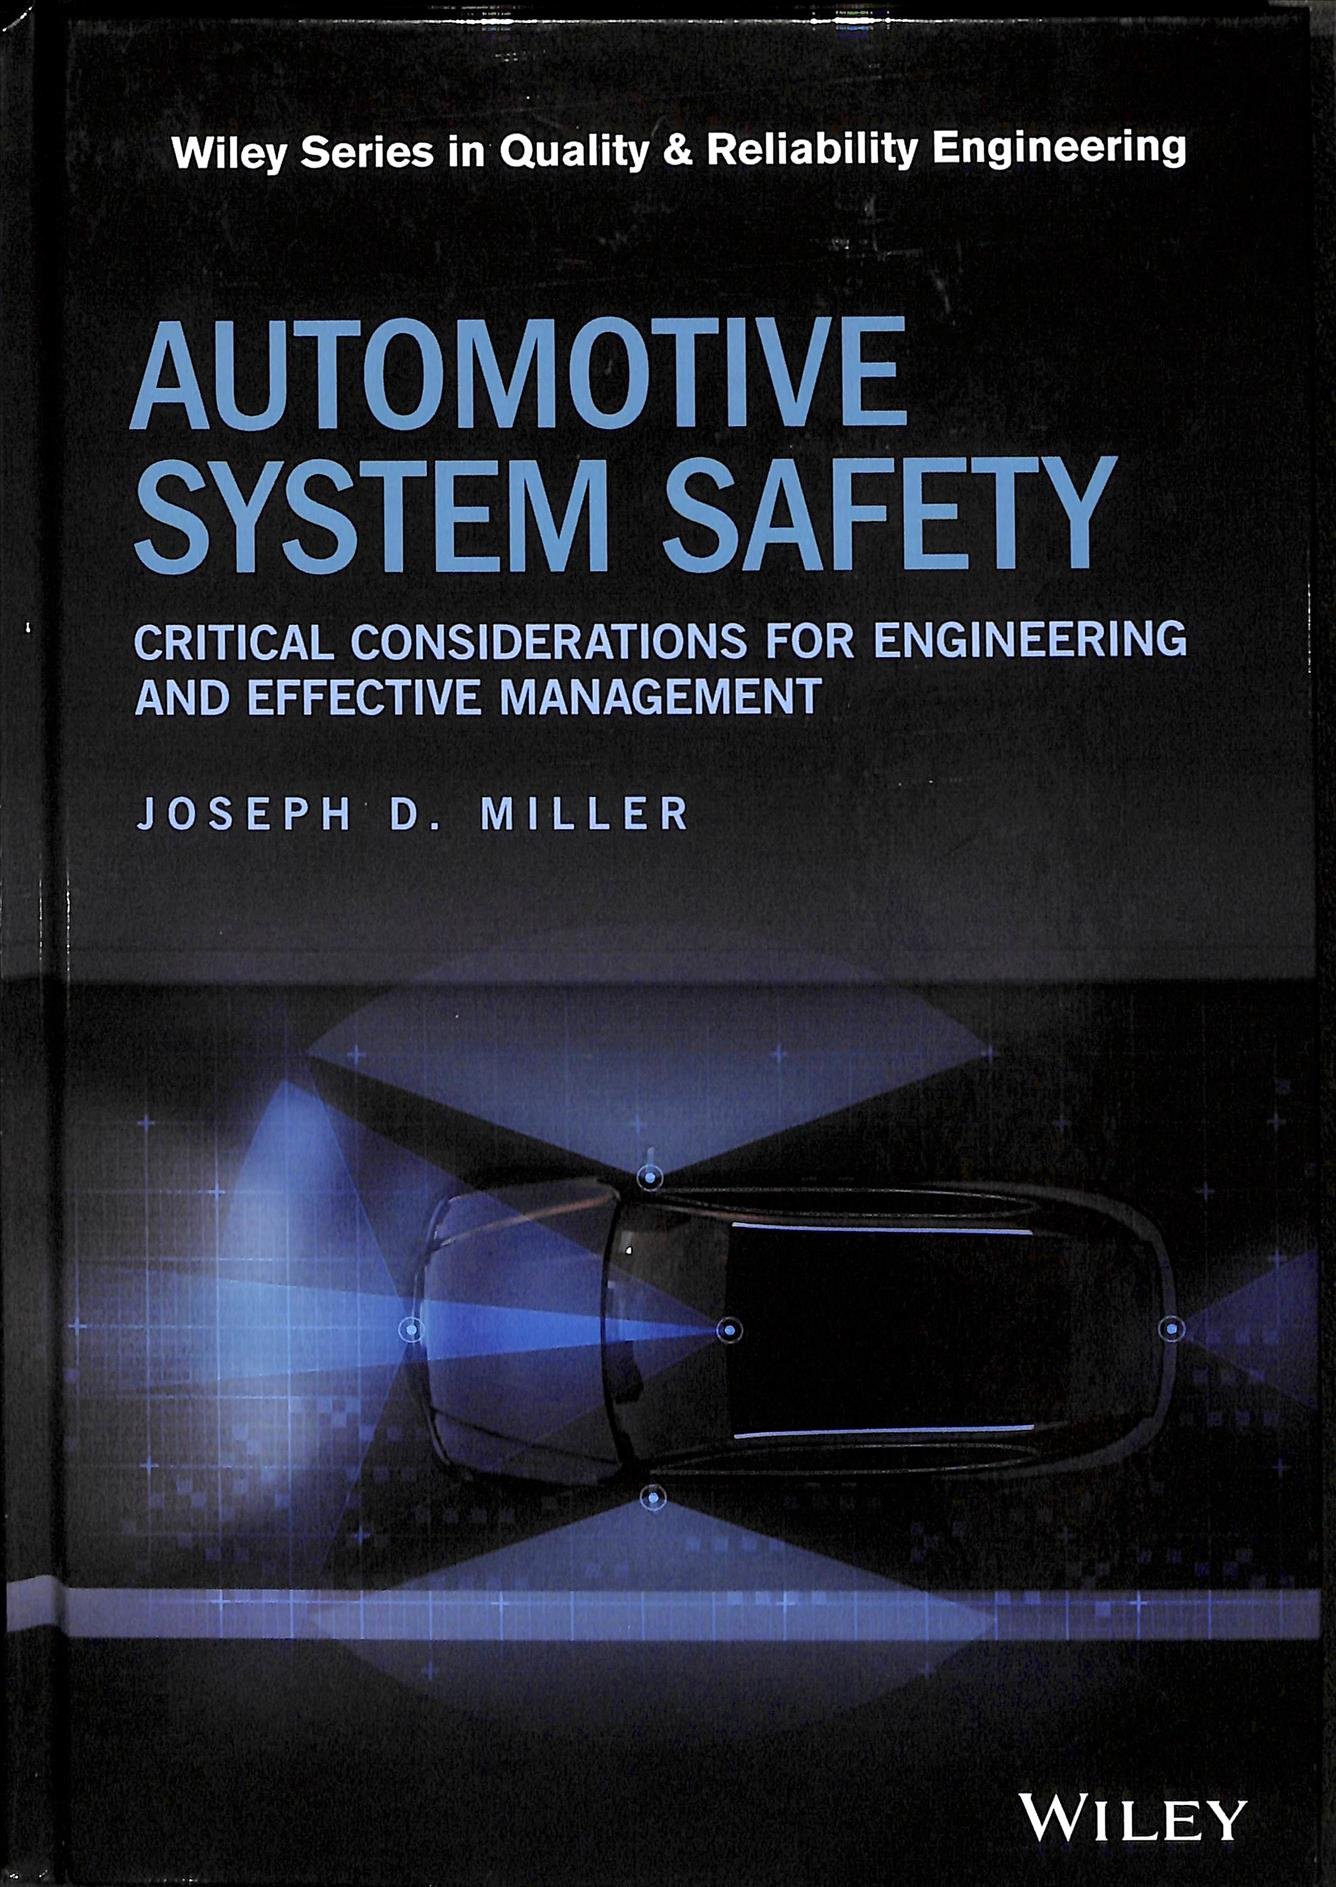 Automotive System Safety - Critical Considerations for Engineering and Effective Management